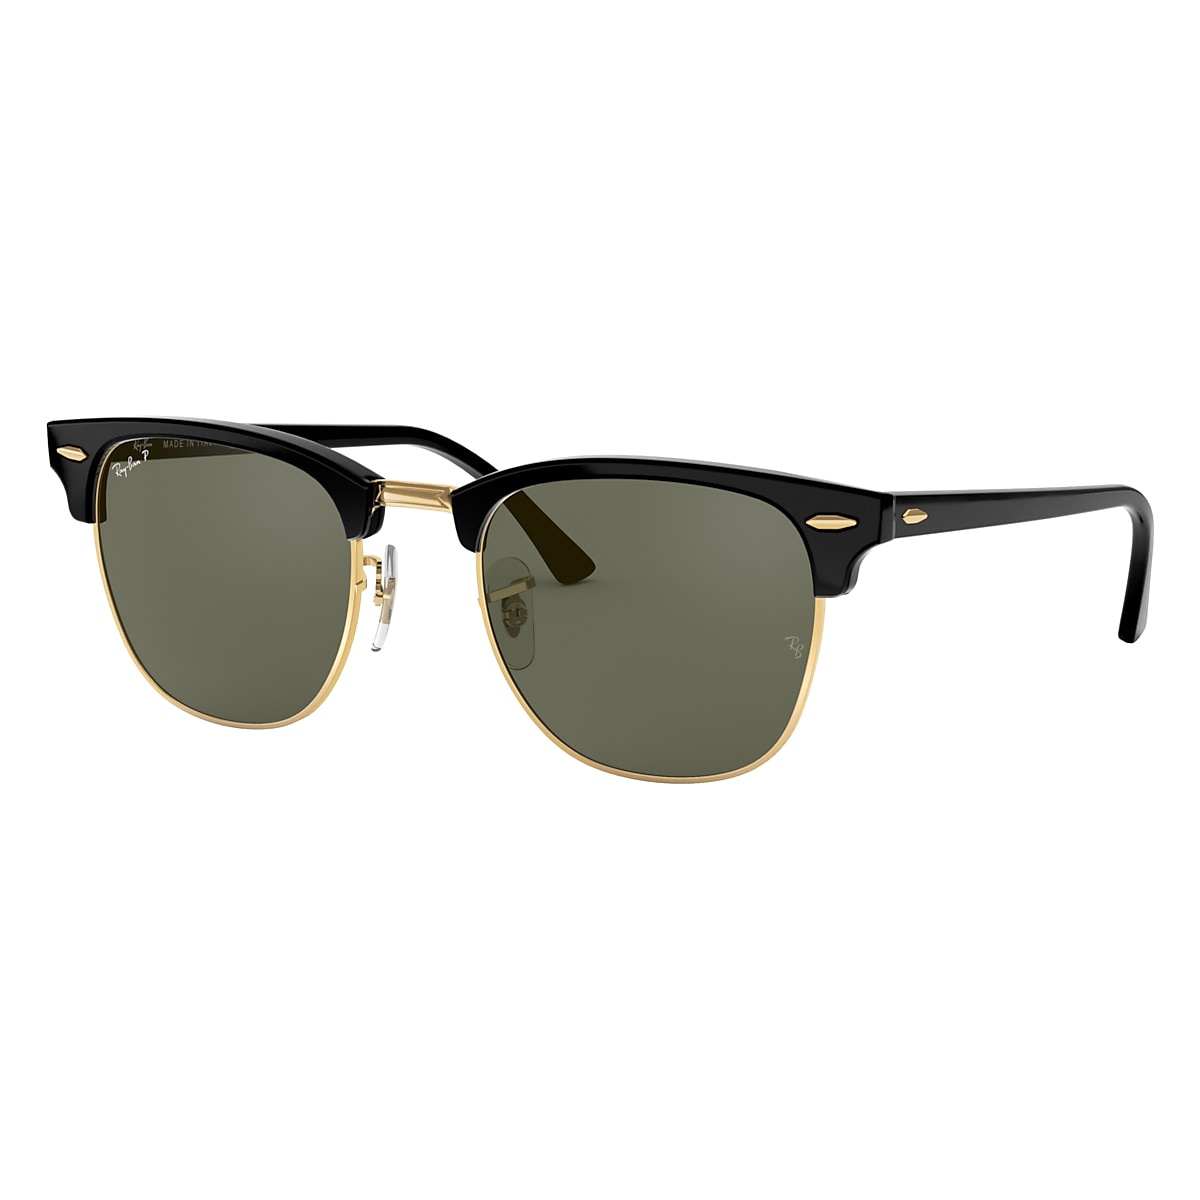 CLASSIC Sunglasses in Black Green - RB3016 | Ray-Ban®